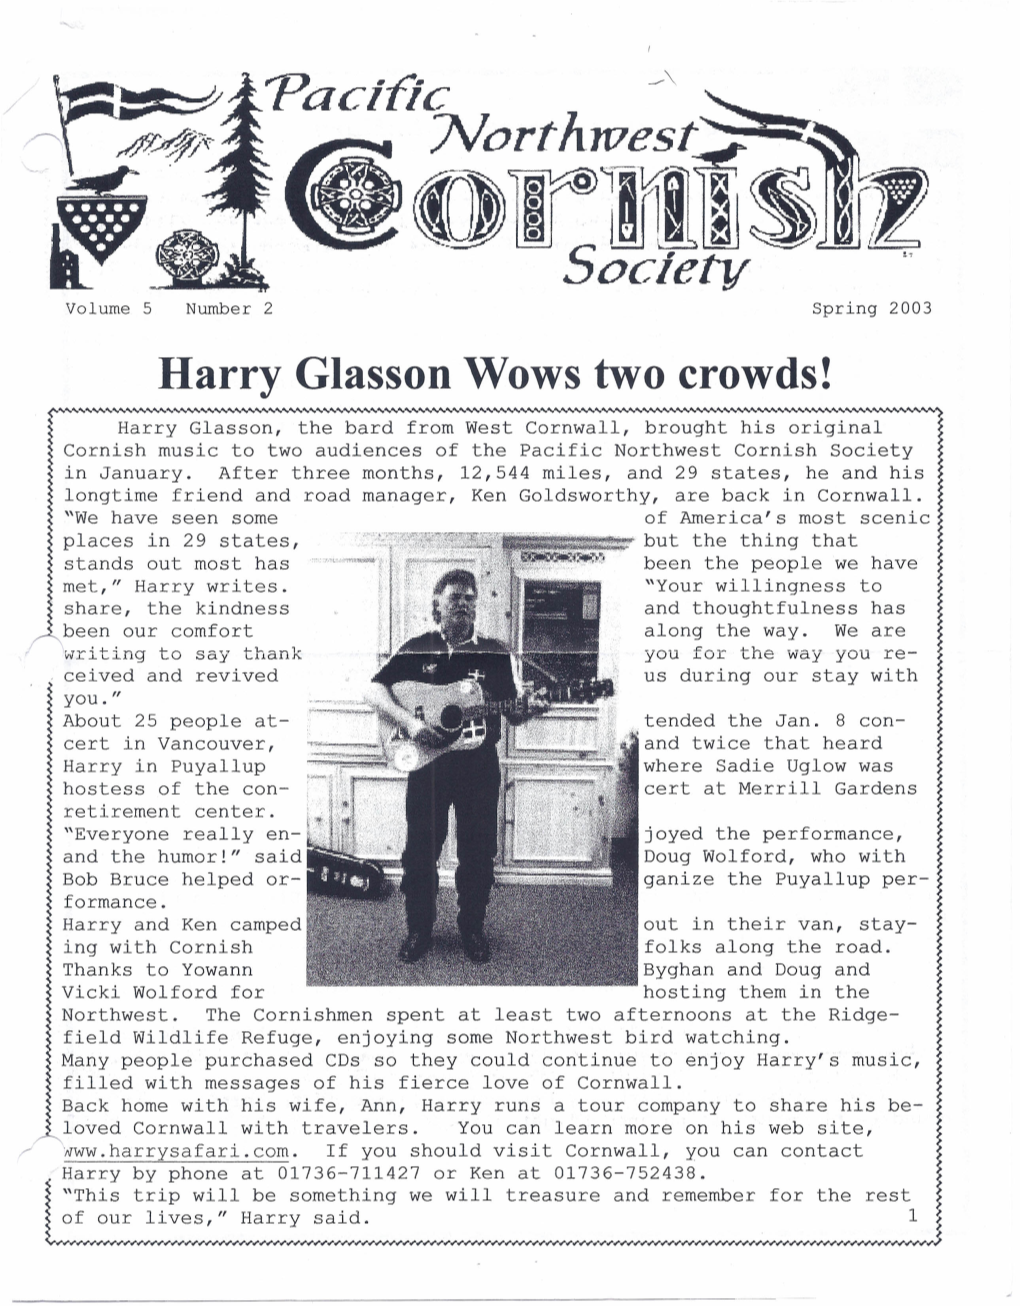 Harry Glasson Wows Two Crowds!